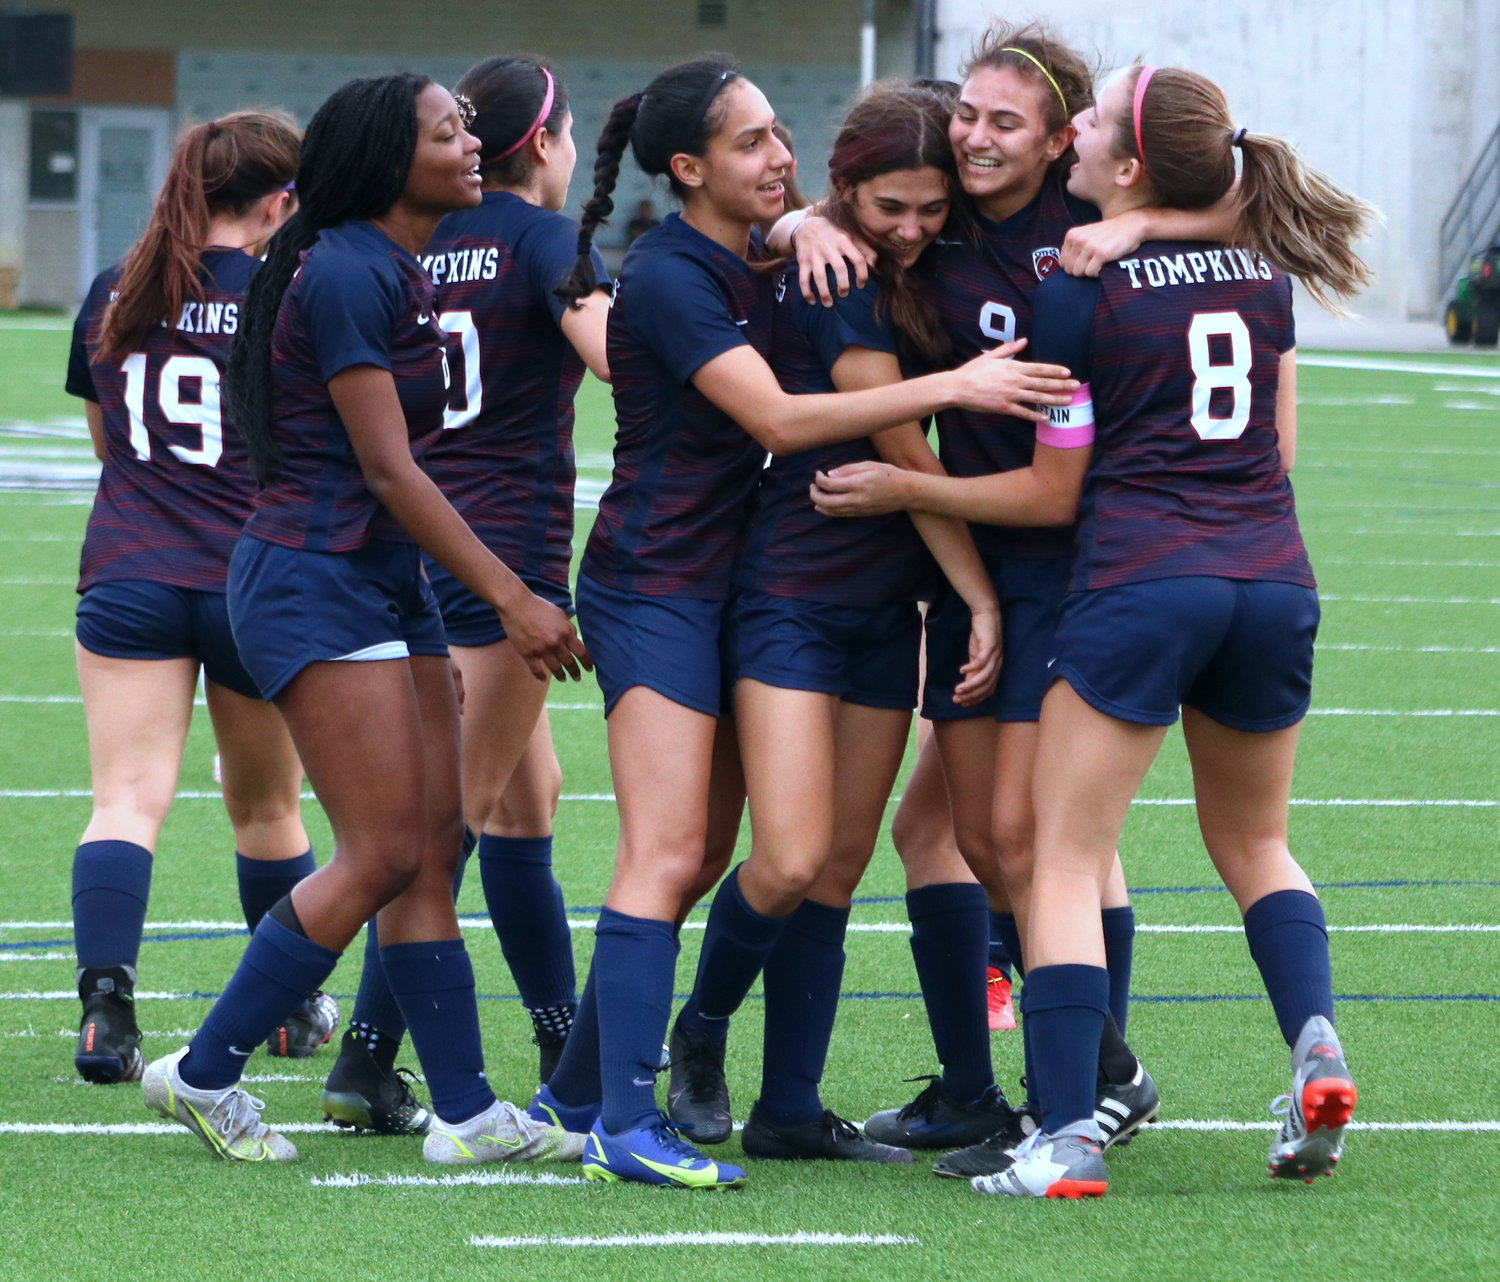 Tompkins’ players celebrate after a Valentina Gianinetto goal during Tuesday’s Class 6A area round game between Tompkins and Bellaire at Legacy Stadium.